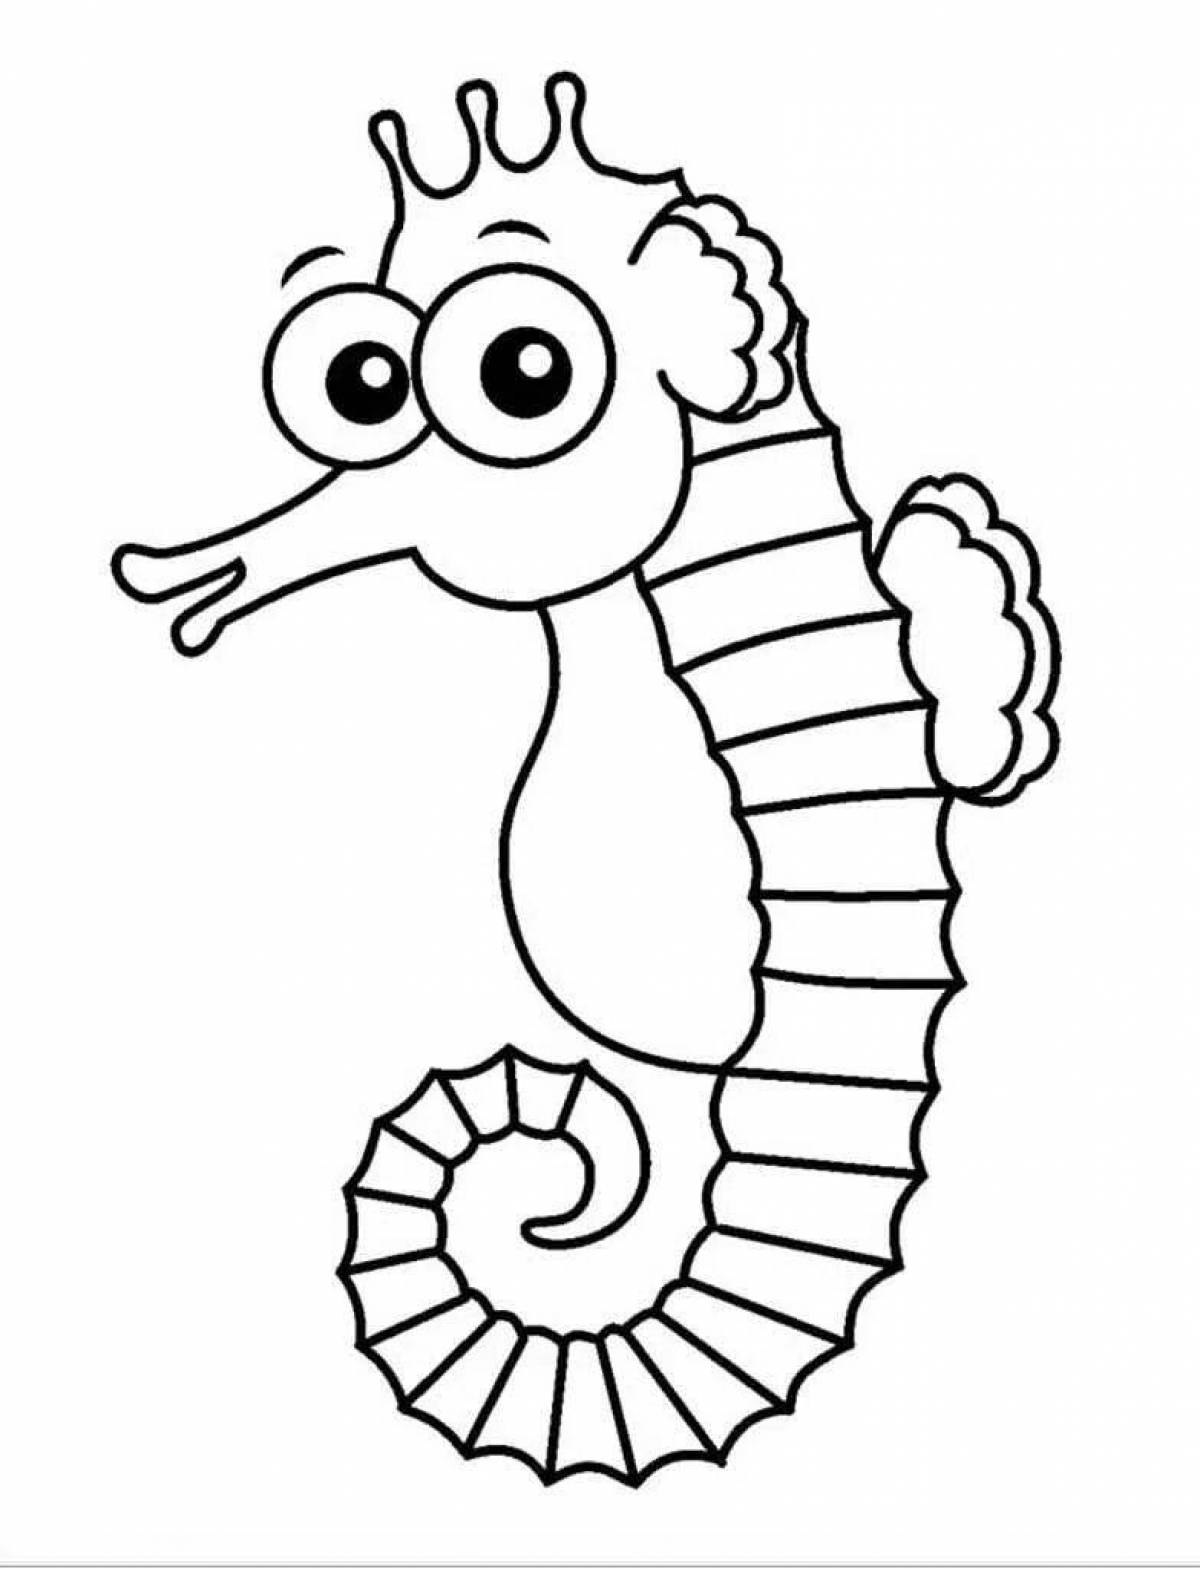 Amazing seahorse coloring page for kids